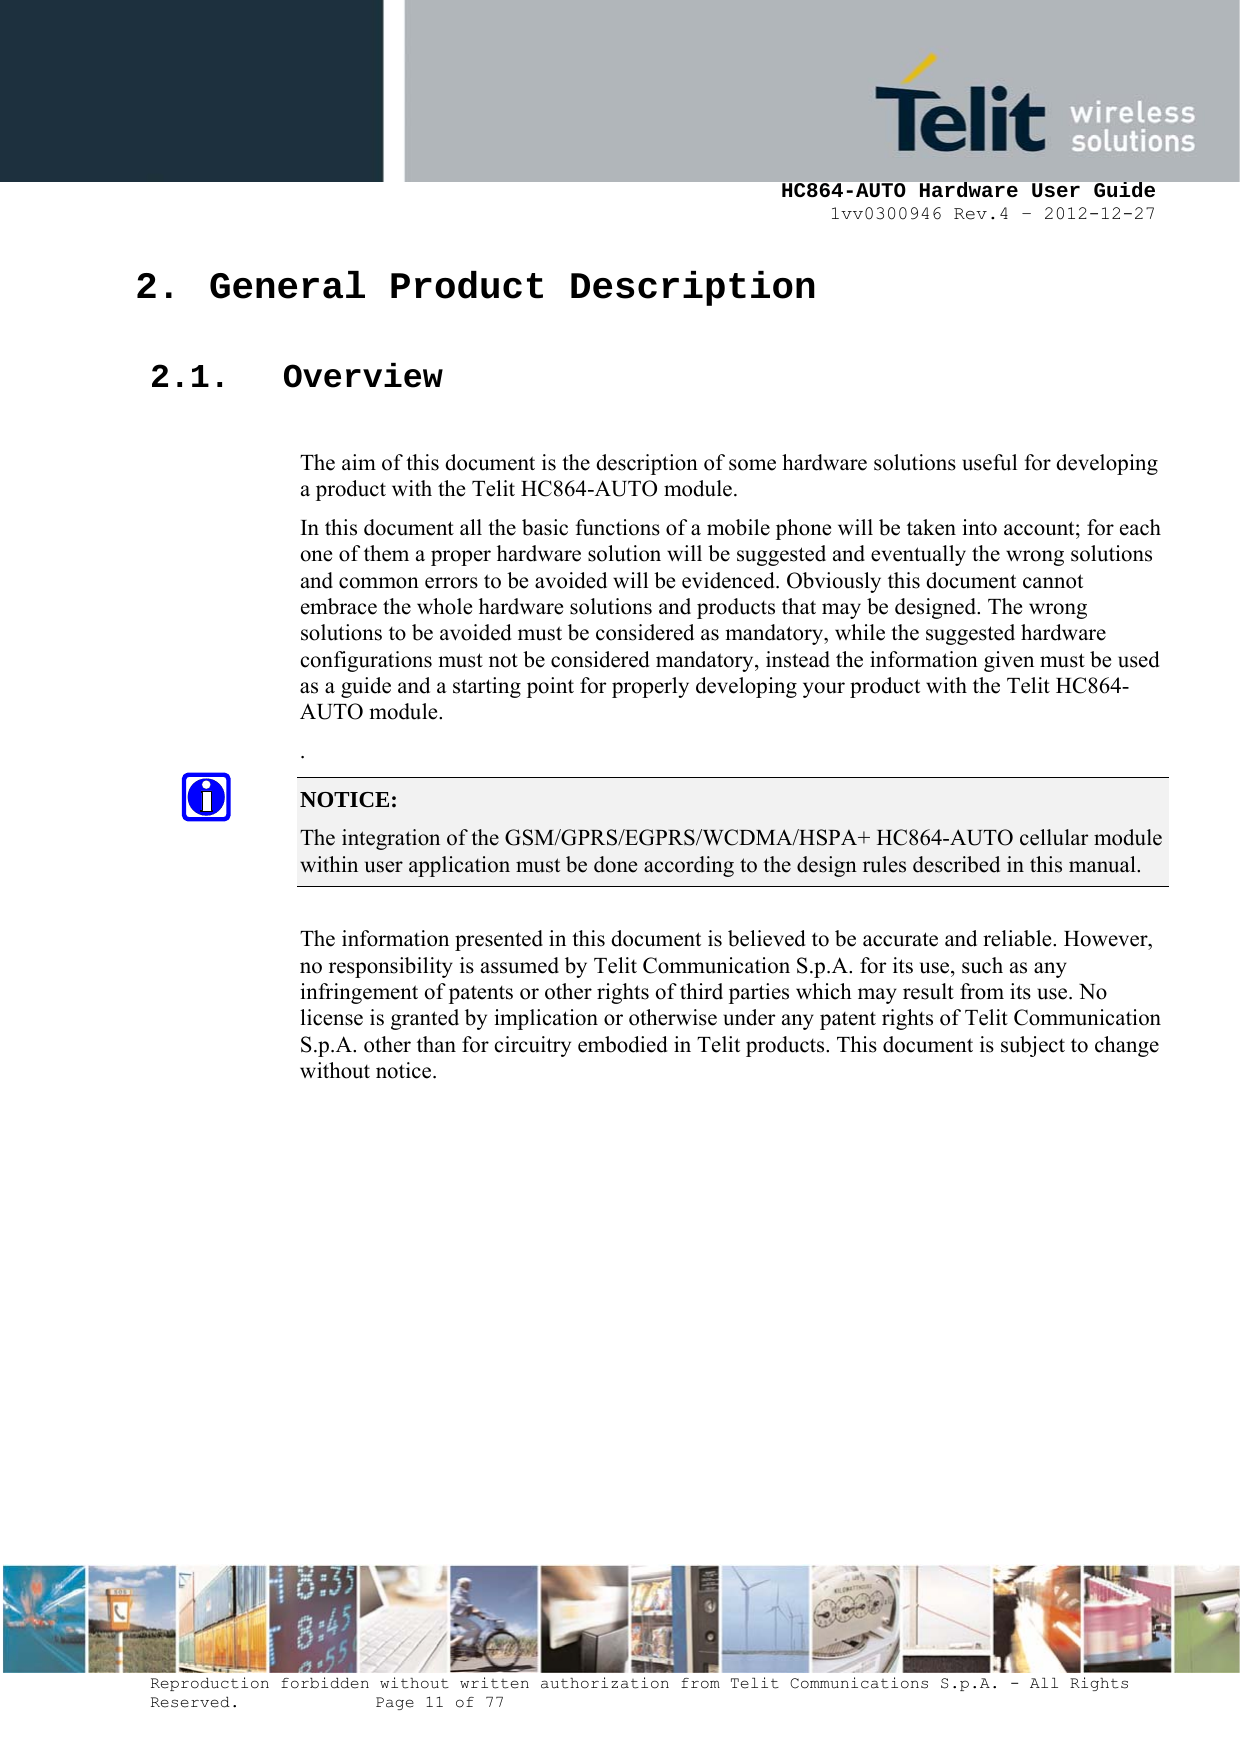     HC864-AUTO Hardware User Guide 1vv0300946 Rev.4 – 2012-12-27 Reproduction forbidden without written authorization from Telit Communications S.p.A. - All Rights Reserved.    Page 11 of 77  2. General Product Description 2.1. Overview  The aim of this document is the description of some hardware solutions useful for developing a product with the Telit HC864-AUTO module. In this document all the basic functions of a mobile phone will be taken into account; for each one of them a proper hardware solution will be suggested and eventually the wrong solutions and common errors to be avoided will be evidenced. Obviously this document cannot embrace the whole hardware solutions and products that may be designed. The wrong solutions to be avoided must be considered as mandatory, while the suggested hardware configurations must not be considered mandatory, instead the information given must be used as a guide and a starting point for properly developing your product with the Telit HC864-AUTO module. . NOTICE: The integration of the GSM/GPRS/EGPRS/WCDMA/HSPA+ HC864-AUTO cellular module within user application must be done according to the design rules described in this manual.    The information presented in this document is believed to be accurate and reliable. However, no responsibility is assumed by Telit Communication S.p.A. for its use, such as any infringement of patents or other rights of third parties which may result from its use. No license is granted by implication or otherwise under any patent rights of Telit Communication S.p.A. other than for circuitry embodied in Telit products. This document is subject to change without notice.  